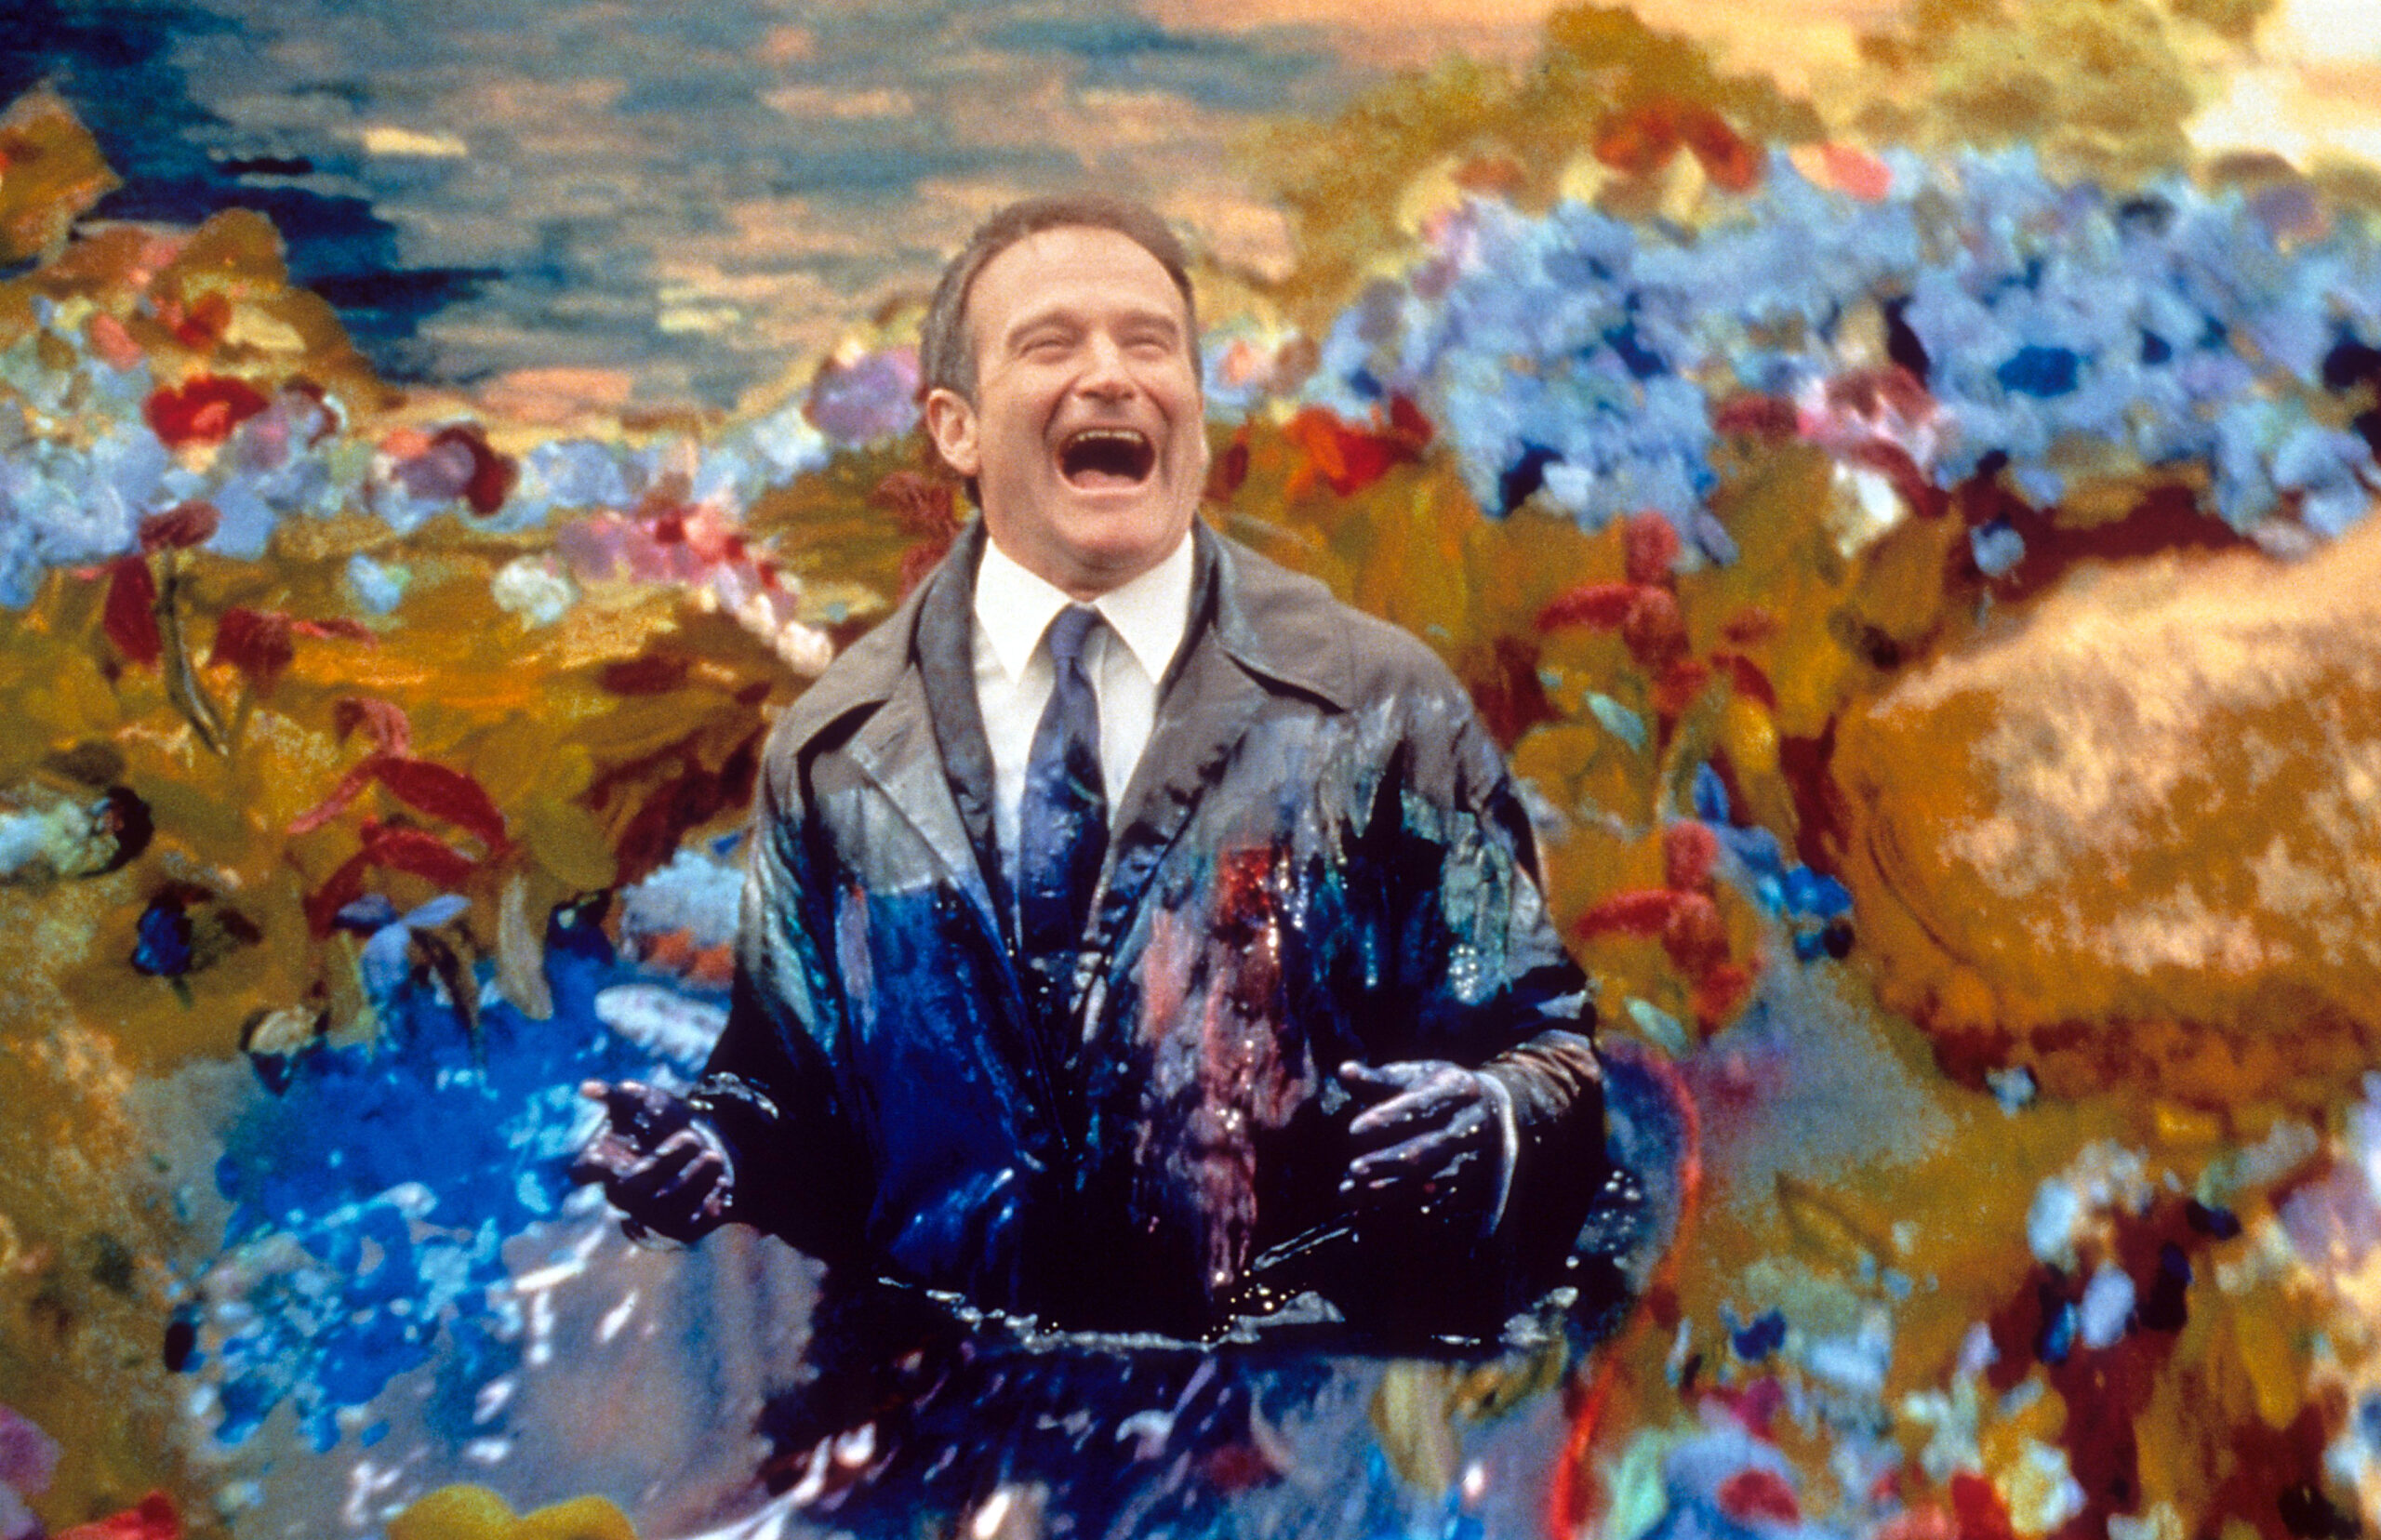 Robin Williams In 'What Dreams May Come'